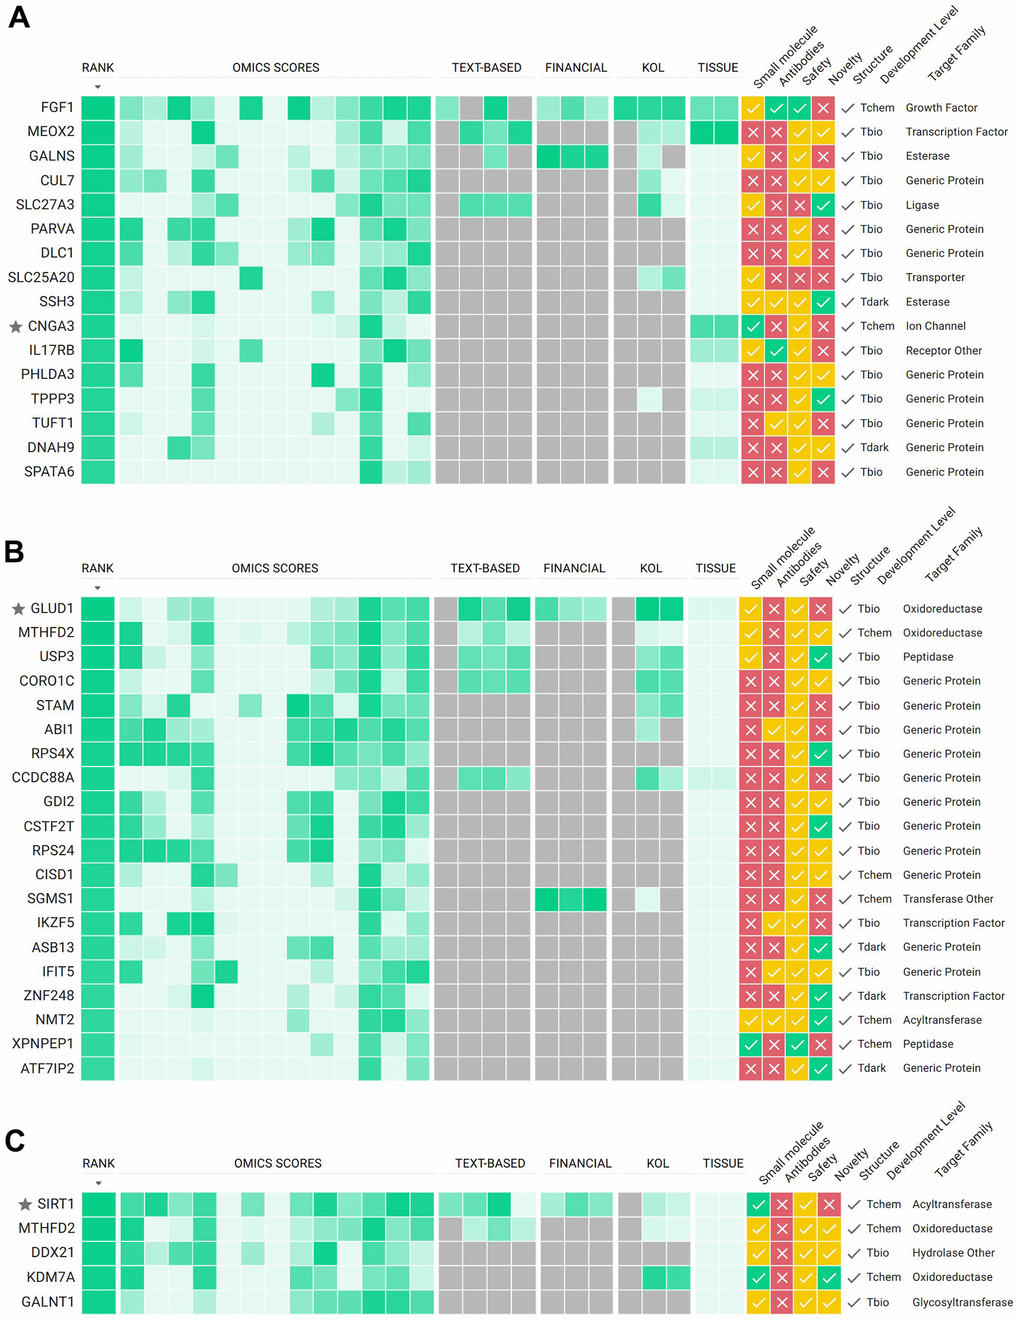 PandaOmics TargetID scoring approach for potential targets selected according to strategy 1 (A), strategy 2 (B) and strategy 3 (C). Target hypotheses are ranked according to the scores obtained from different AI-powered predictive models: omics-, text-, key opinion leaders (KOLs) and funding- based. For each target additional information on tissue specific expression, accessibility by small molecules and antibodies, safety, novelty, structure availability, development level and protein family are provided. For a detailed description of all scores and filters see Materials and Methods section, as well as the user manual at https://insilico.com/pandaomics/help.